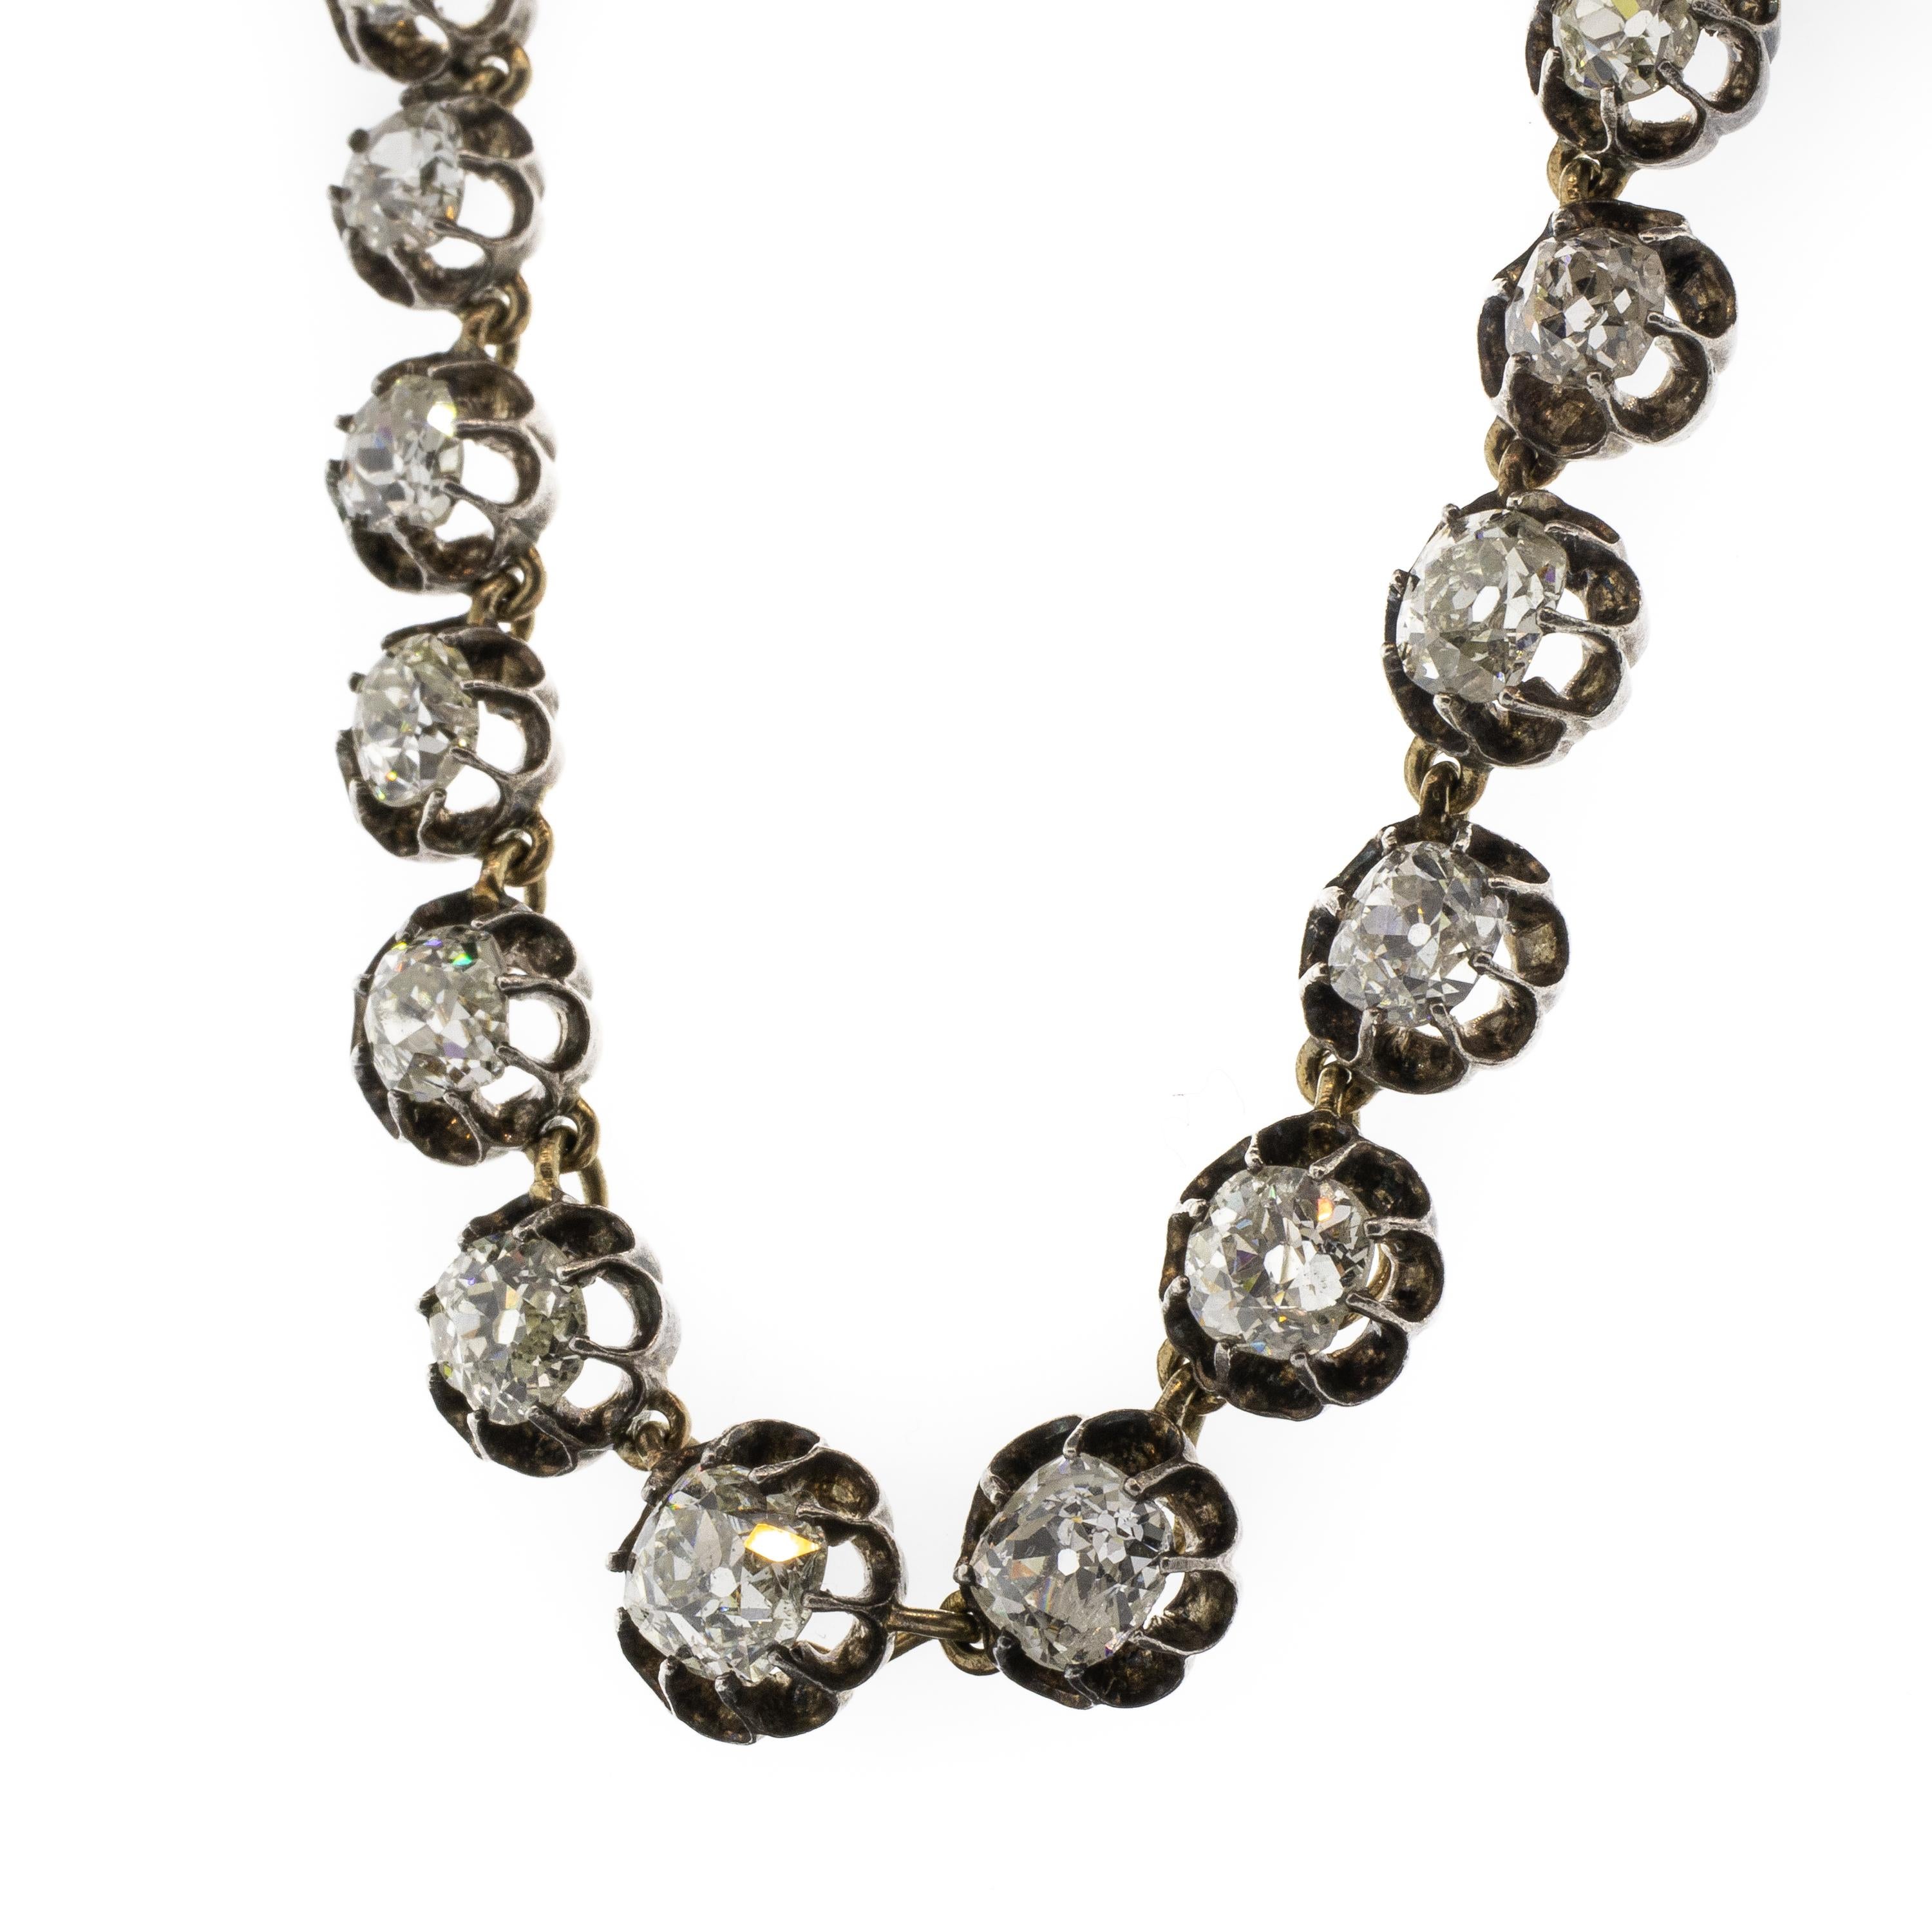 This one is for the true vintage jewelry connoisseur who appreciates the story as much as the piece. This stunning necklace came in as part of a six-piece estate that escaped the Nazi invasion of Vienna, Austria in 1938. We'd be happy to share more